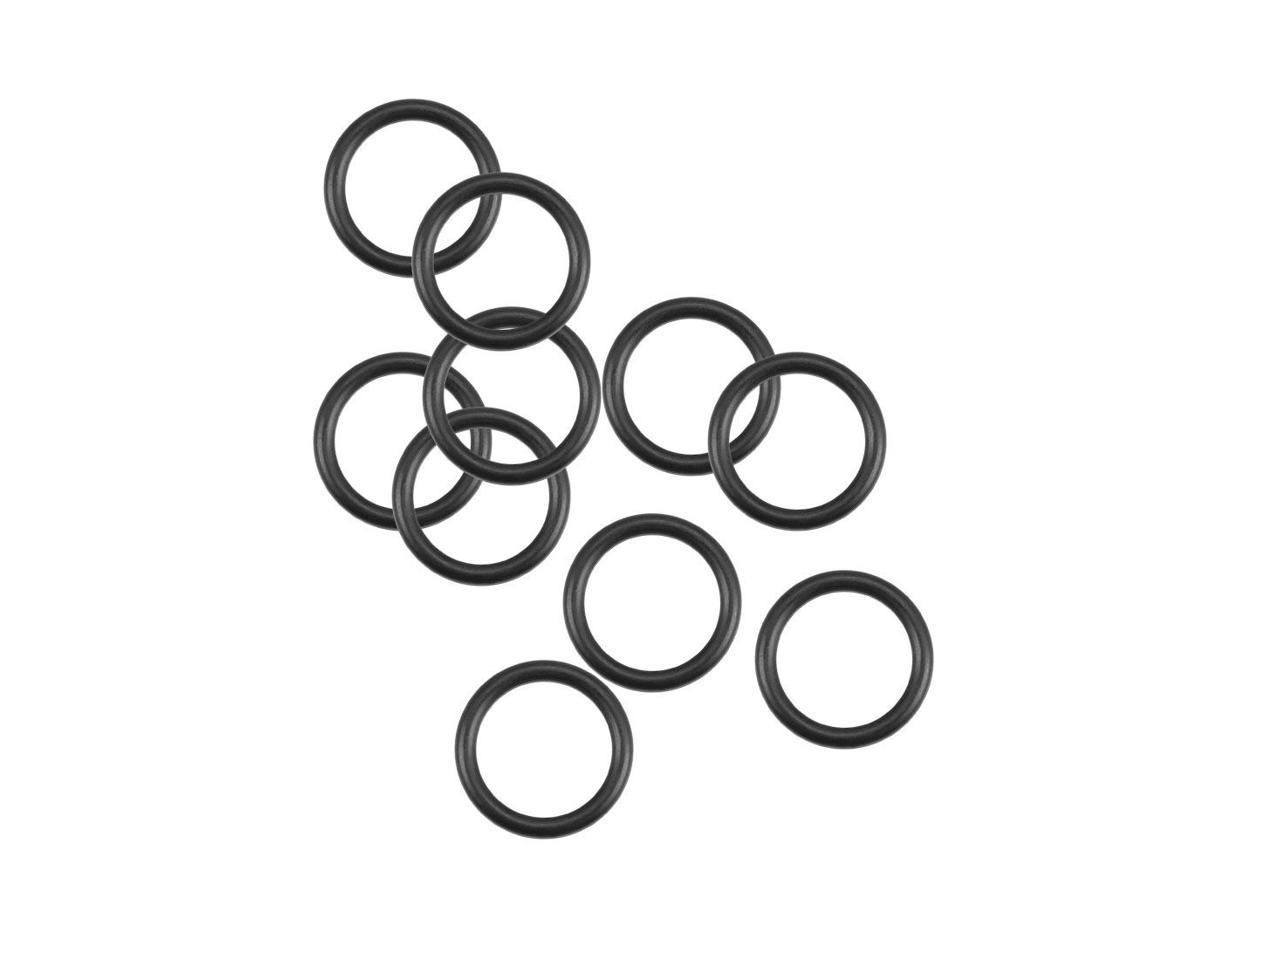 O-Rings Nitrile Rubber 17mm x 22.3mm x 2.65mm Round Seal Gasket 5 Pcs 